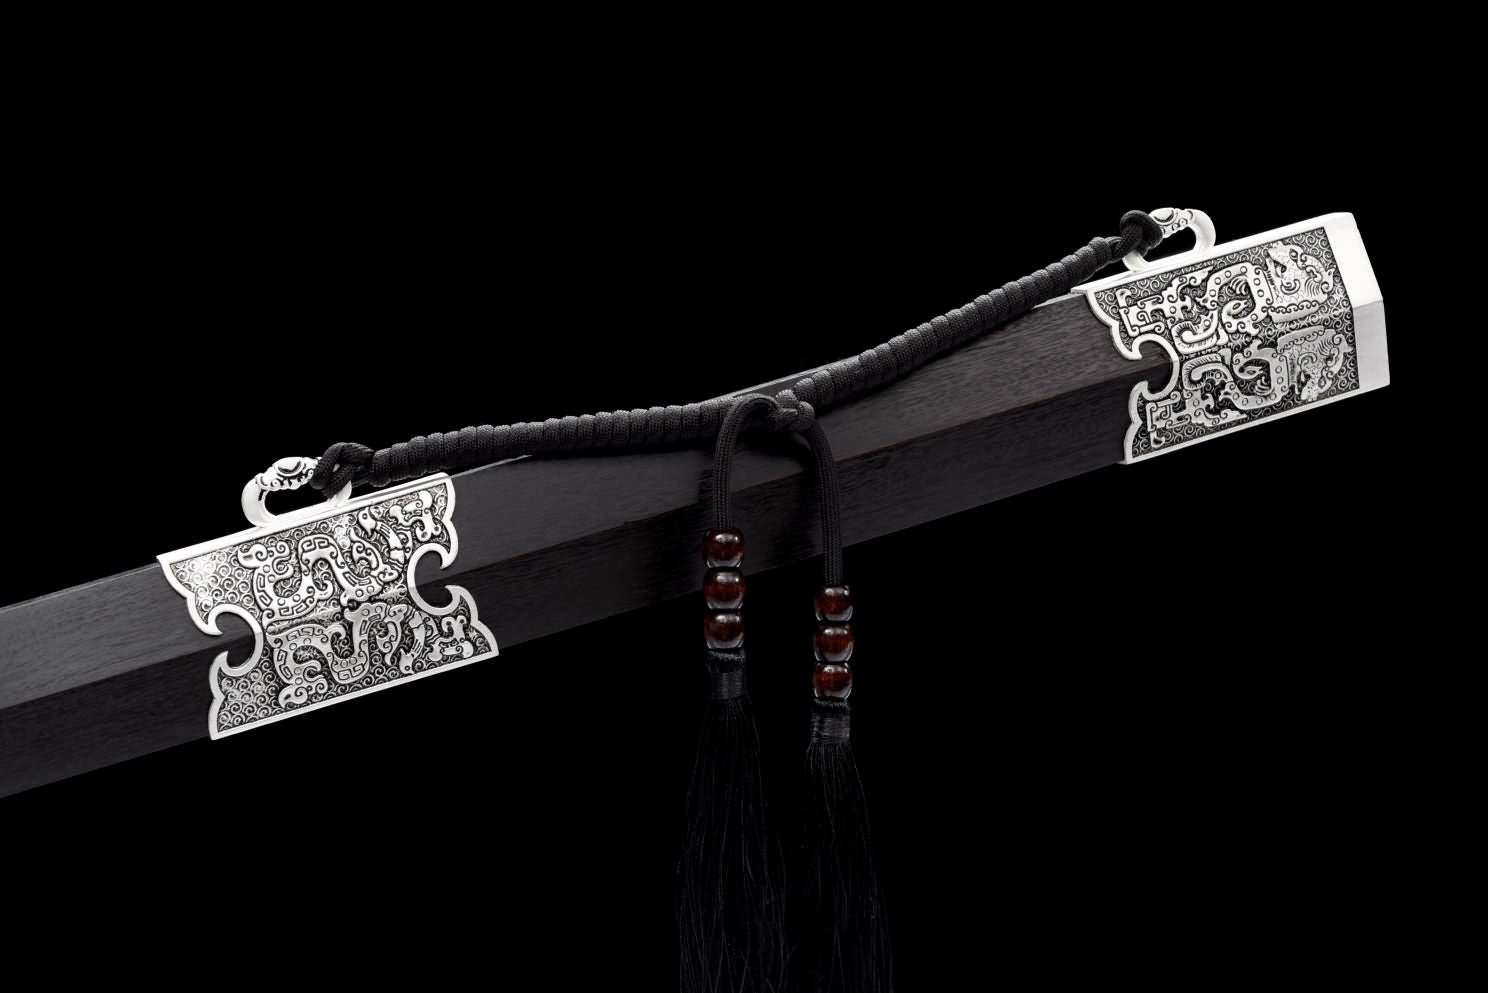 Chinese Swords Han jian Sword Real,Hand Forged Damascus Blades,Black Wood Scabbard,Alloy Handle